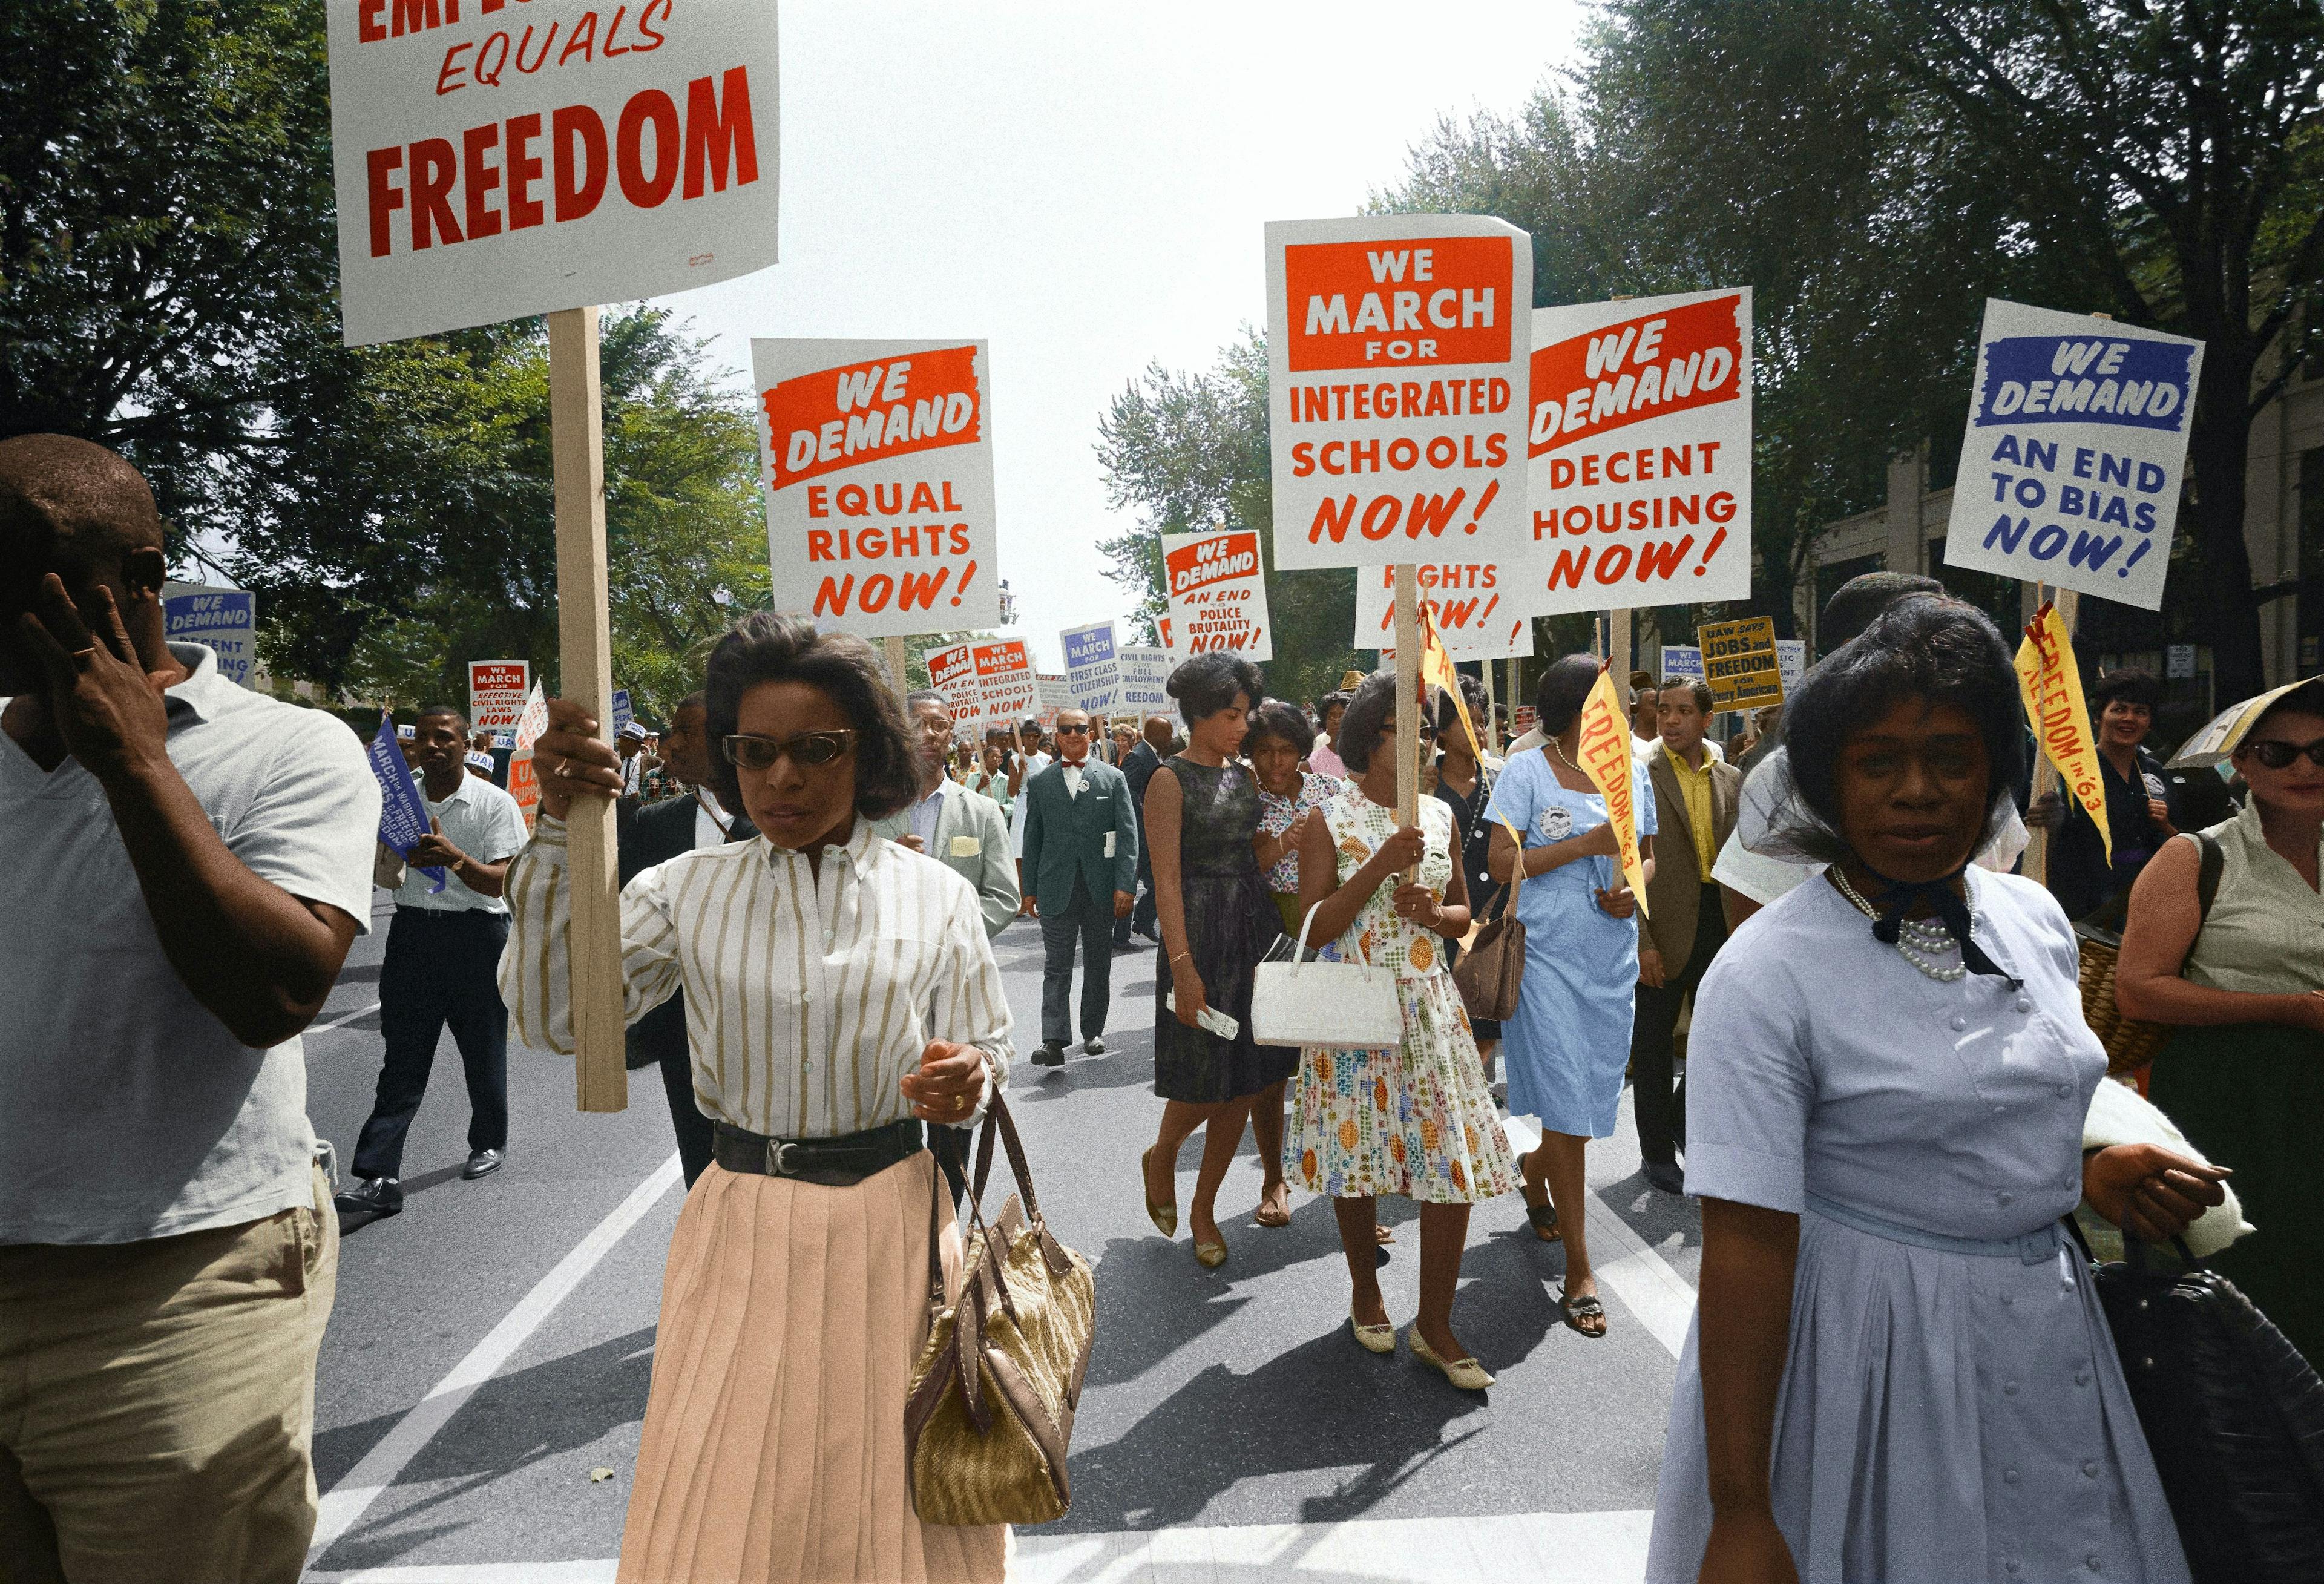 Civil rights march in 1963 in Washington D.C. USA.